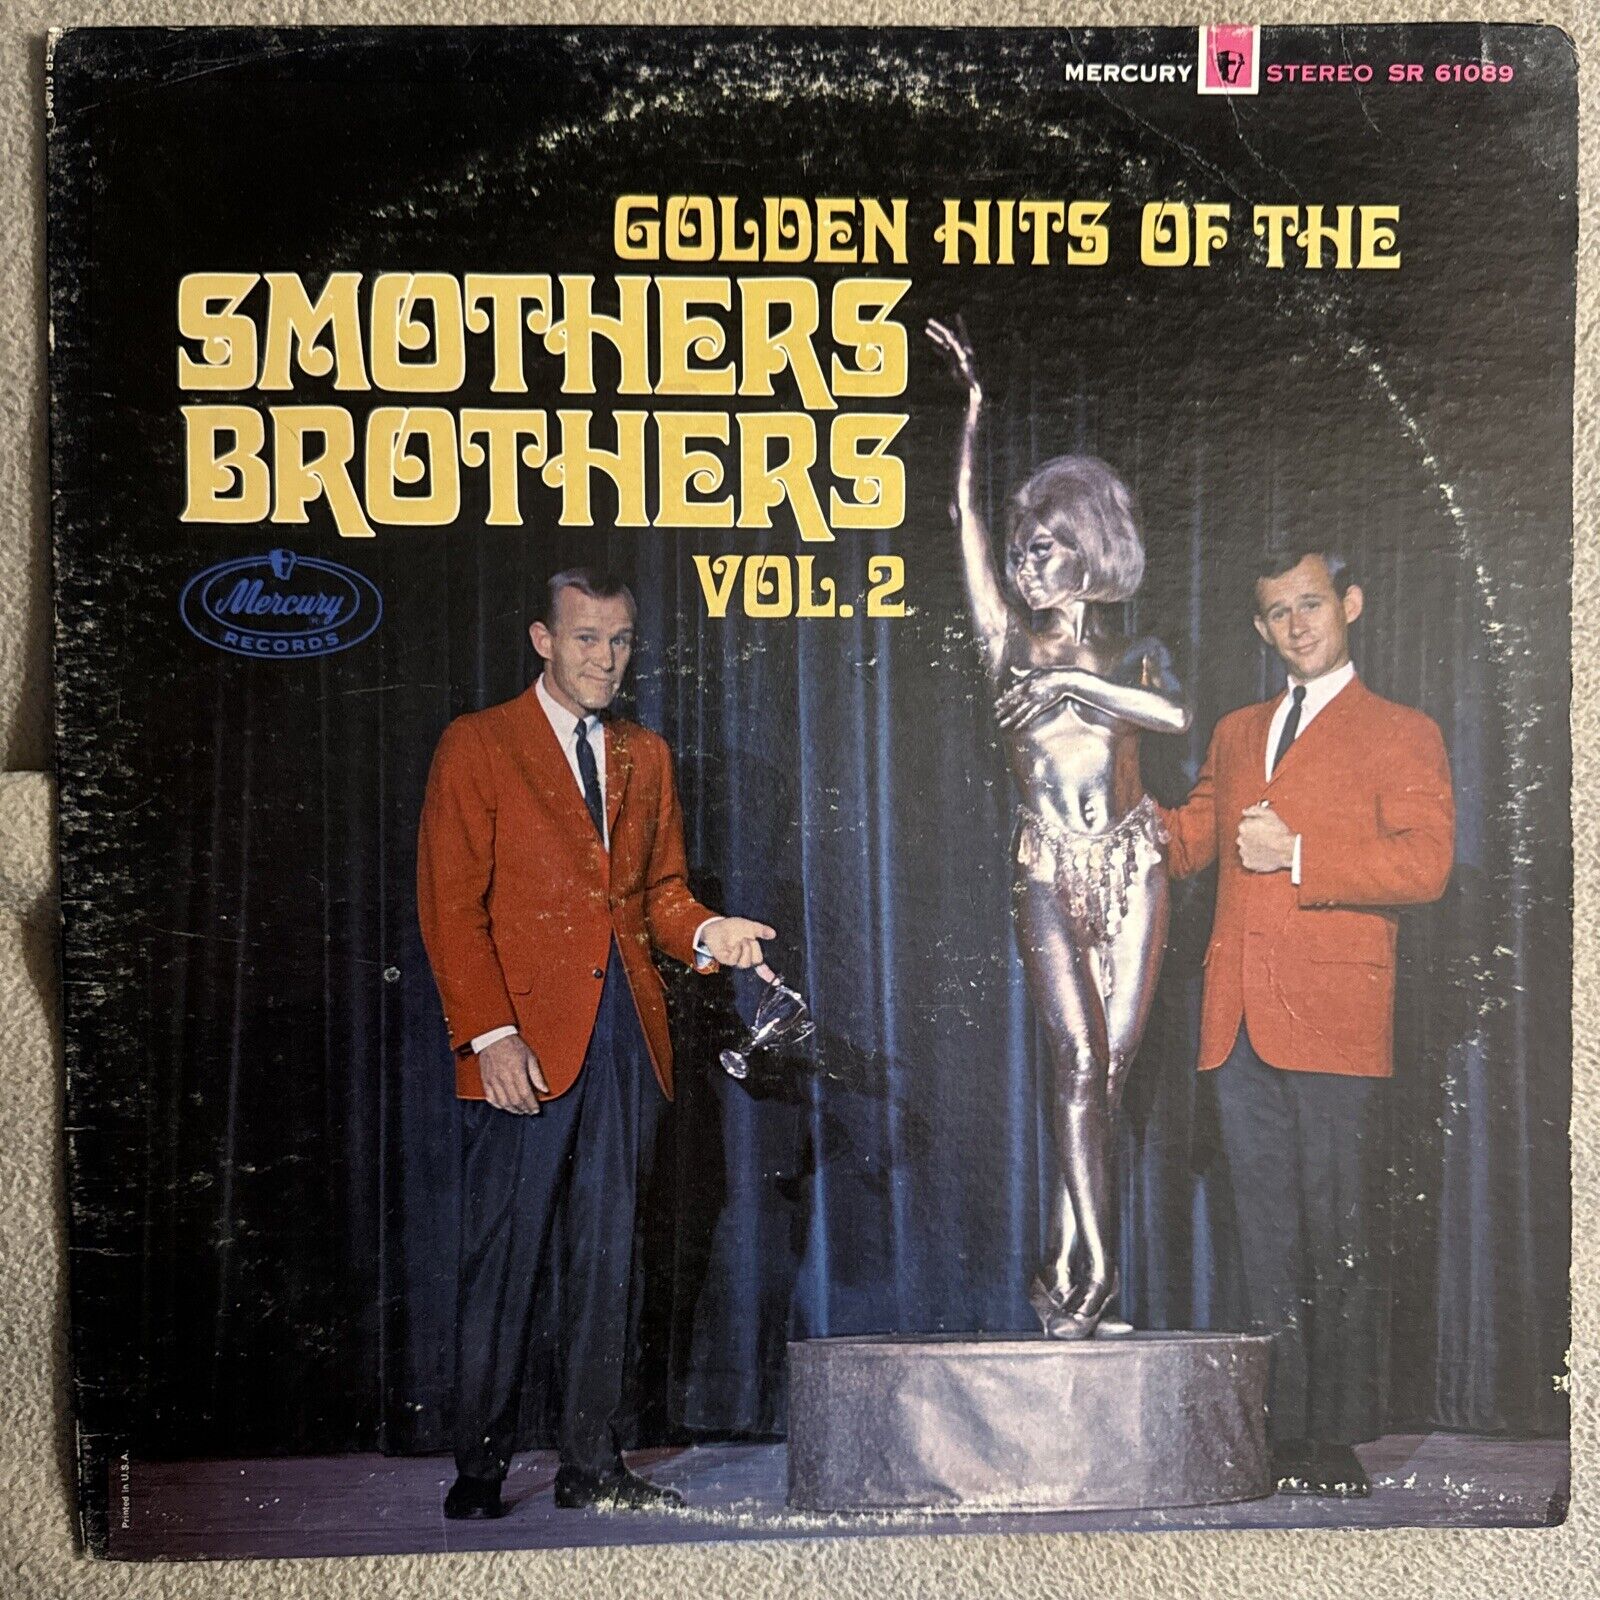 GOLDEN HITS OF THE SMOTHERS BROTHERS, VOL 2 / MERCURY STEREO SR-61089